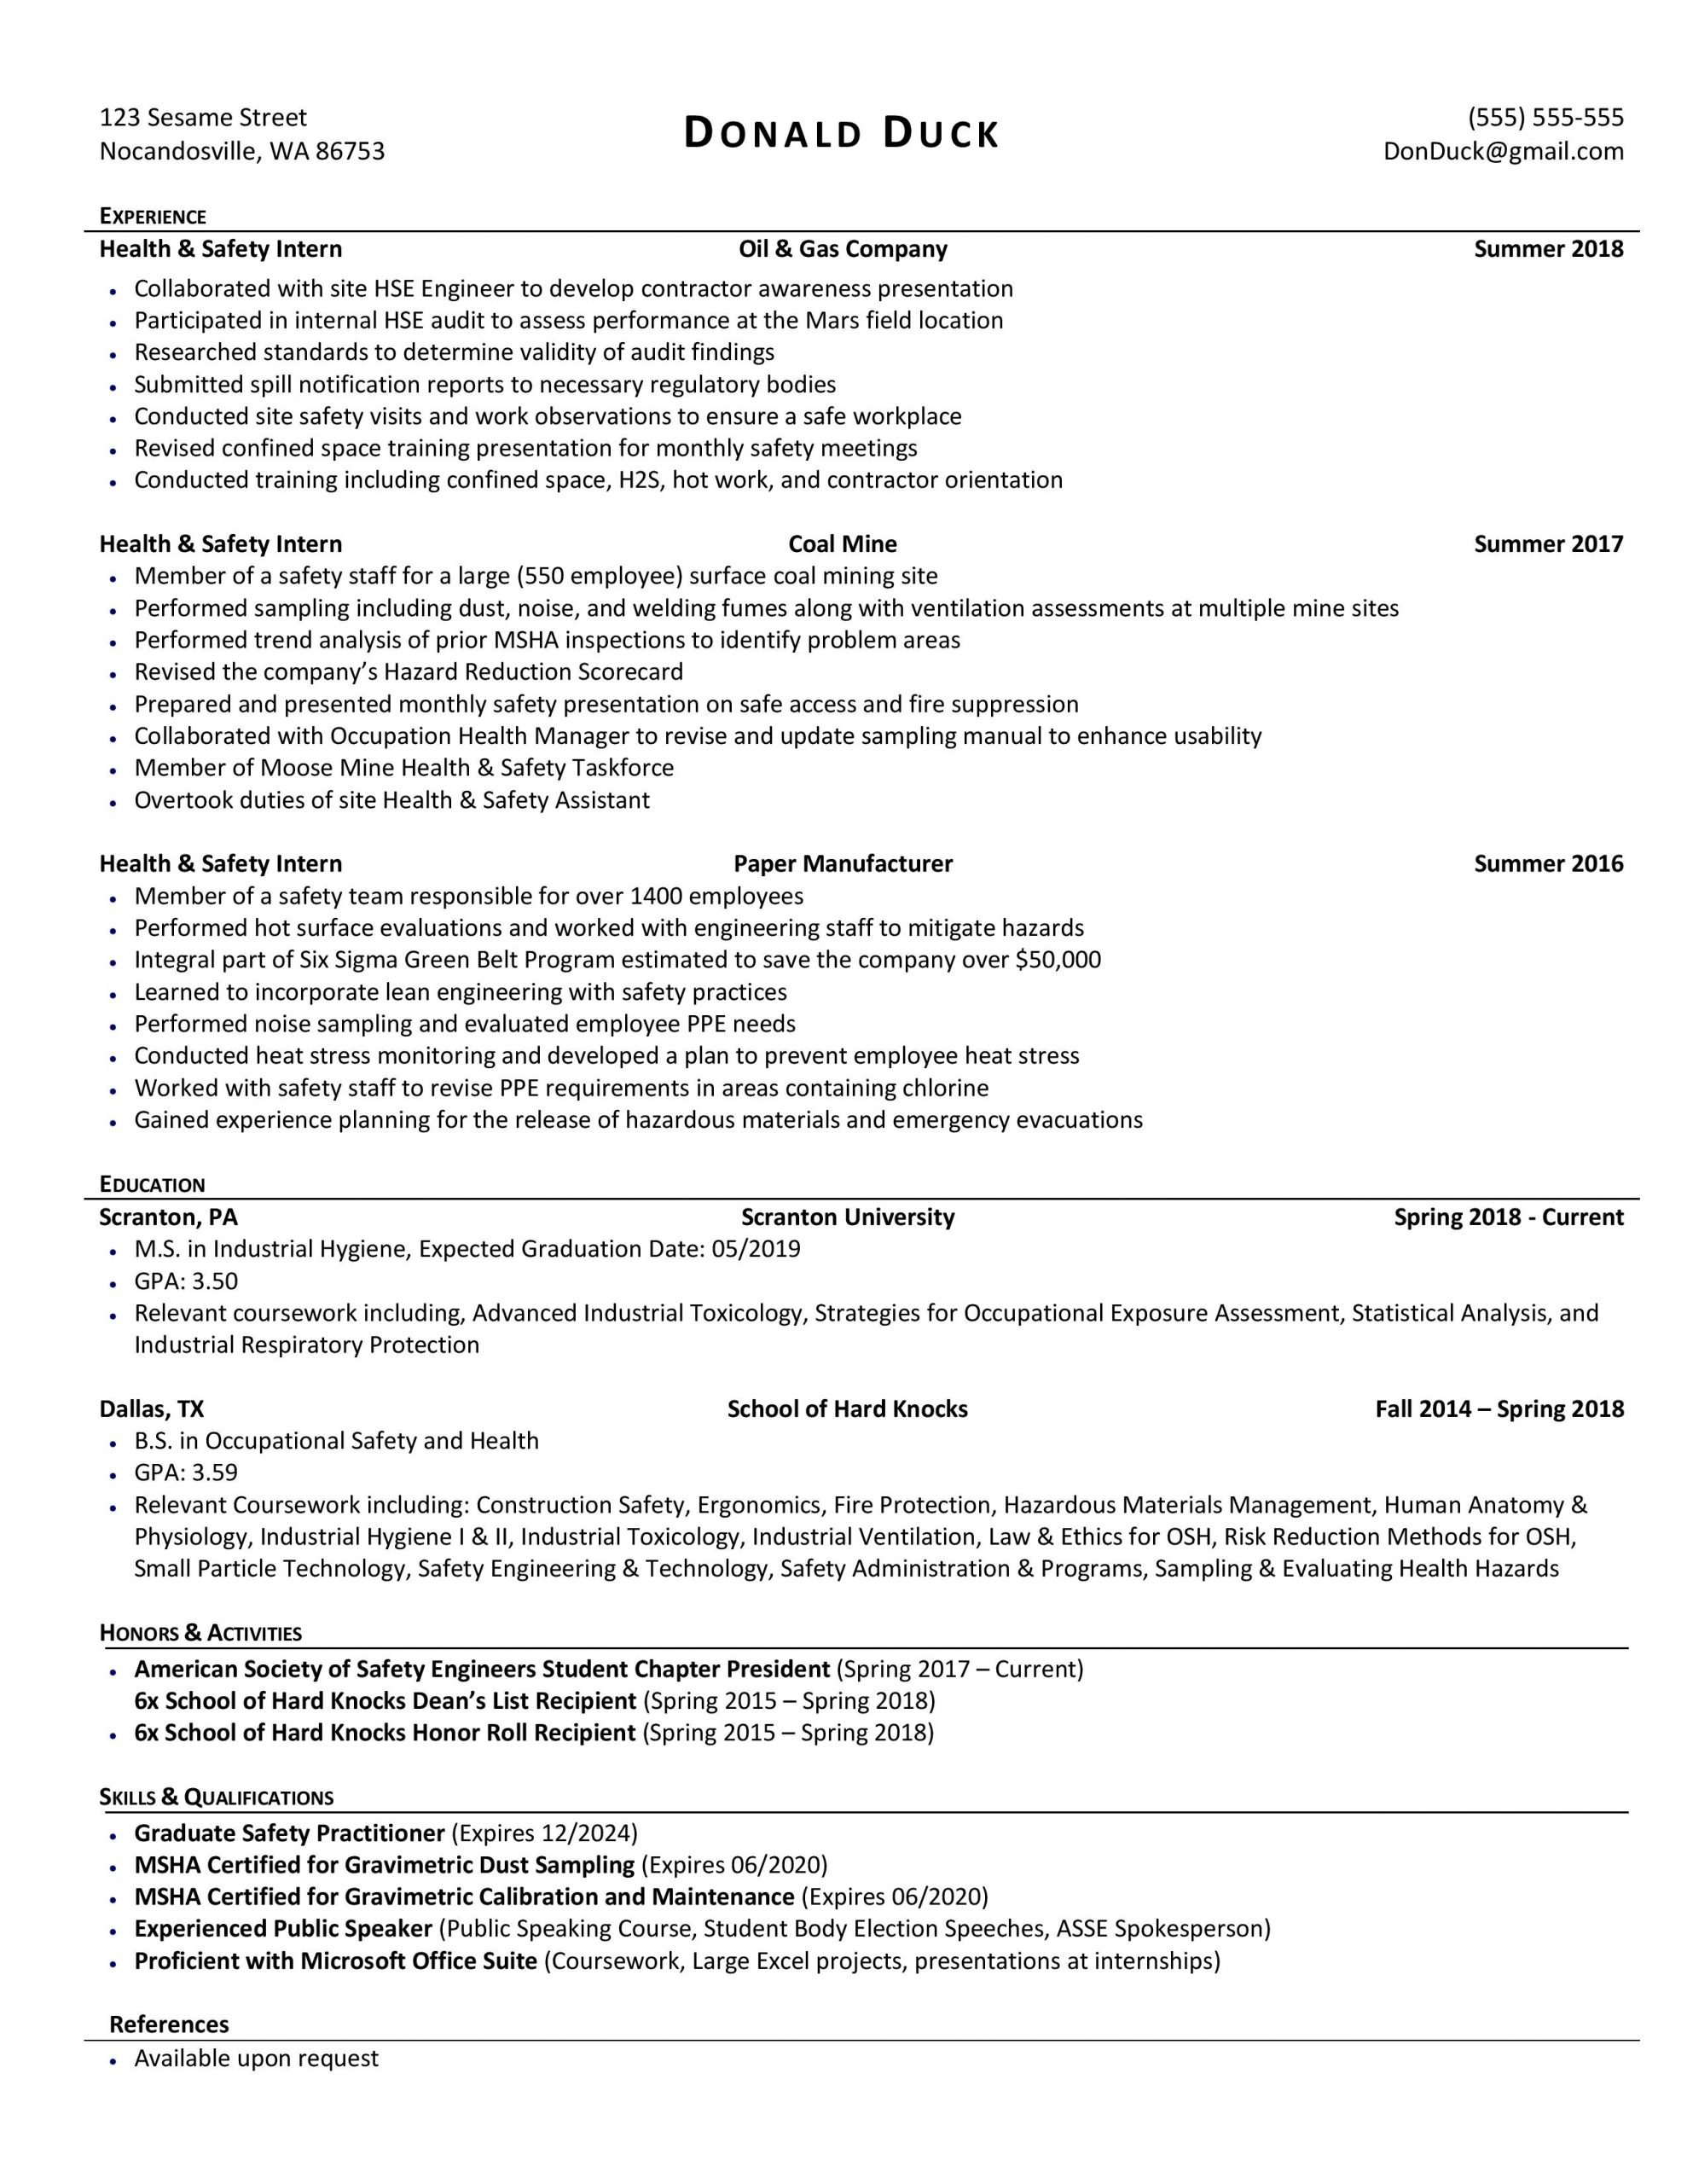 Resume Expected Graduation Format